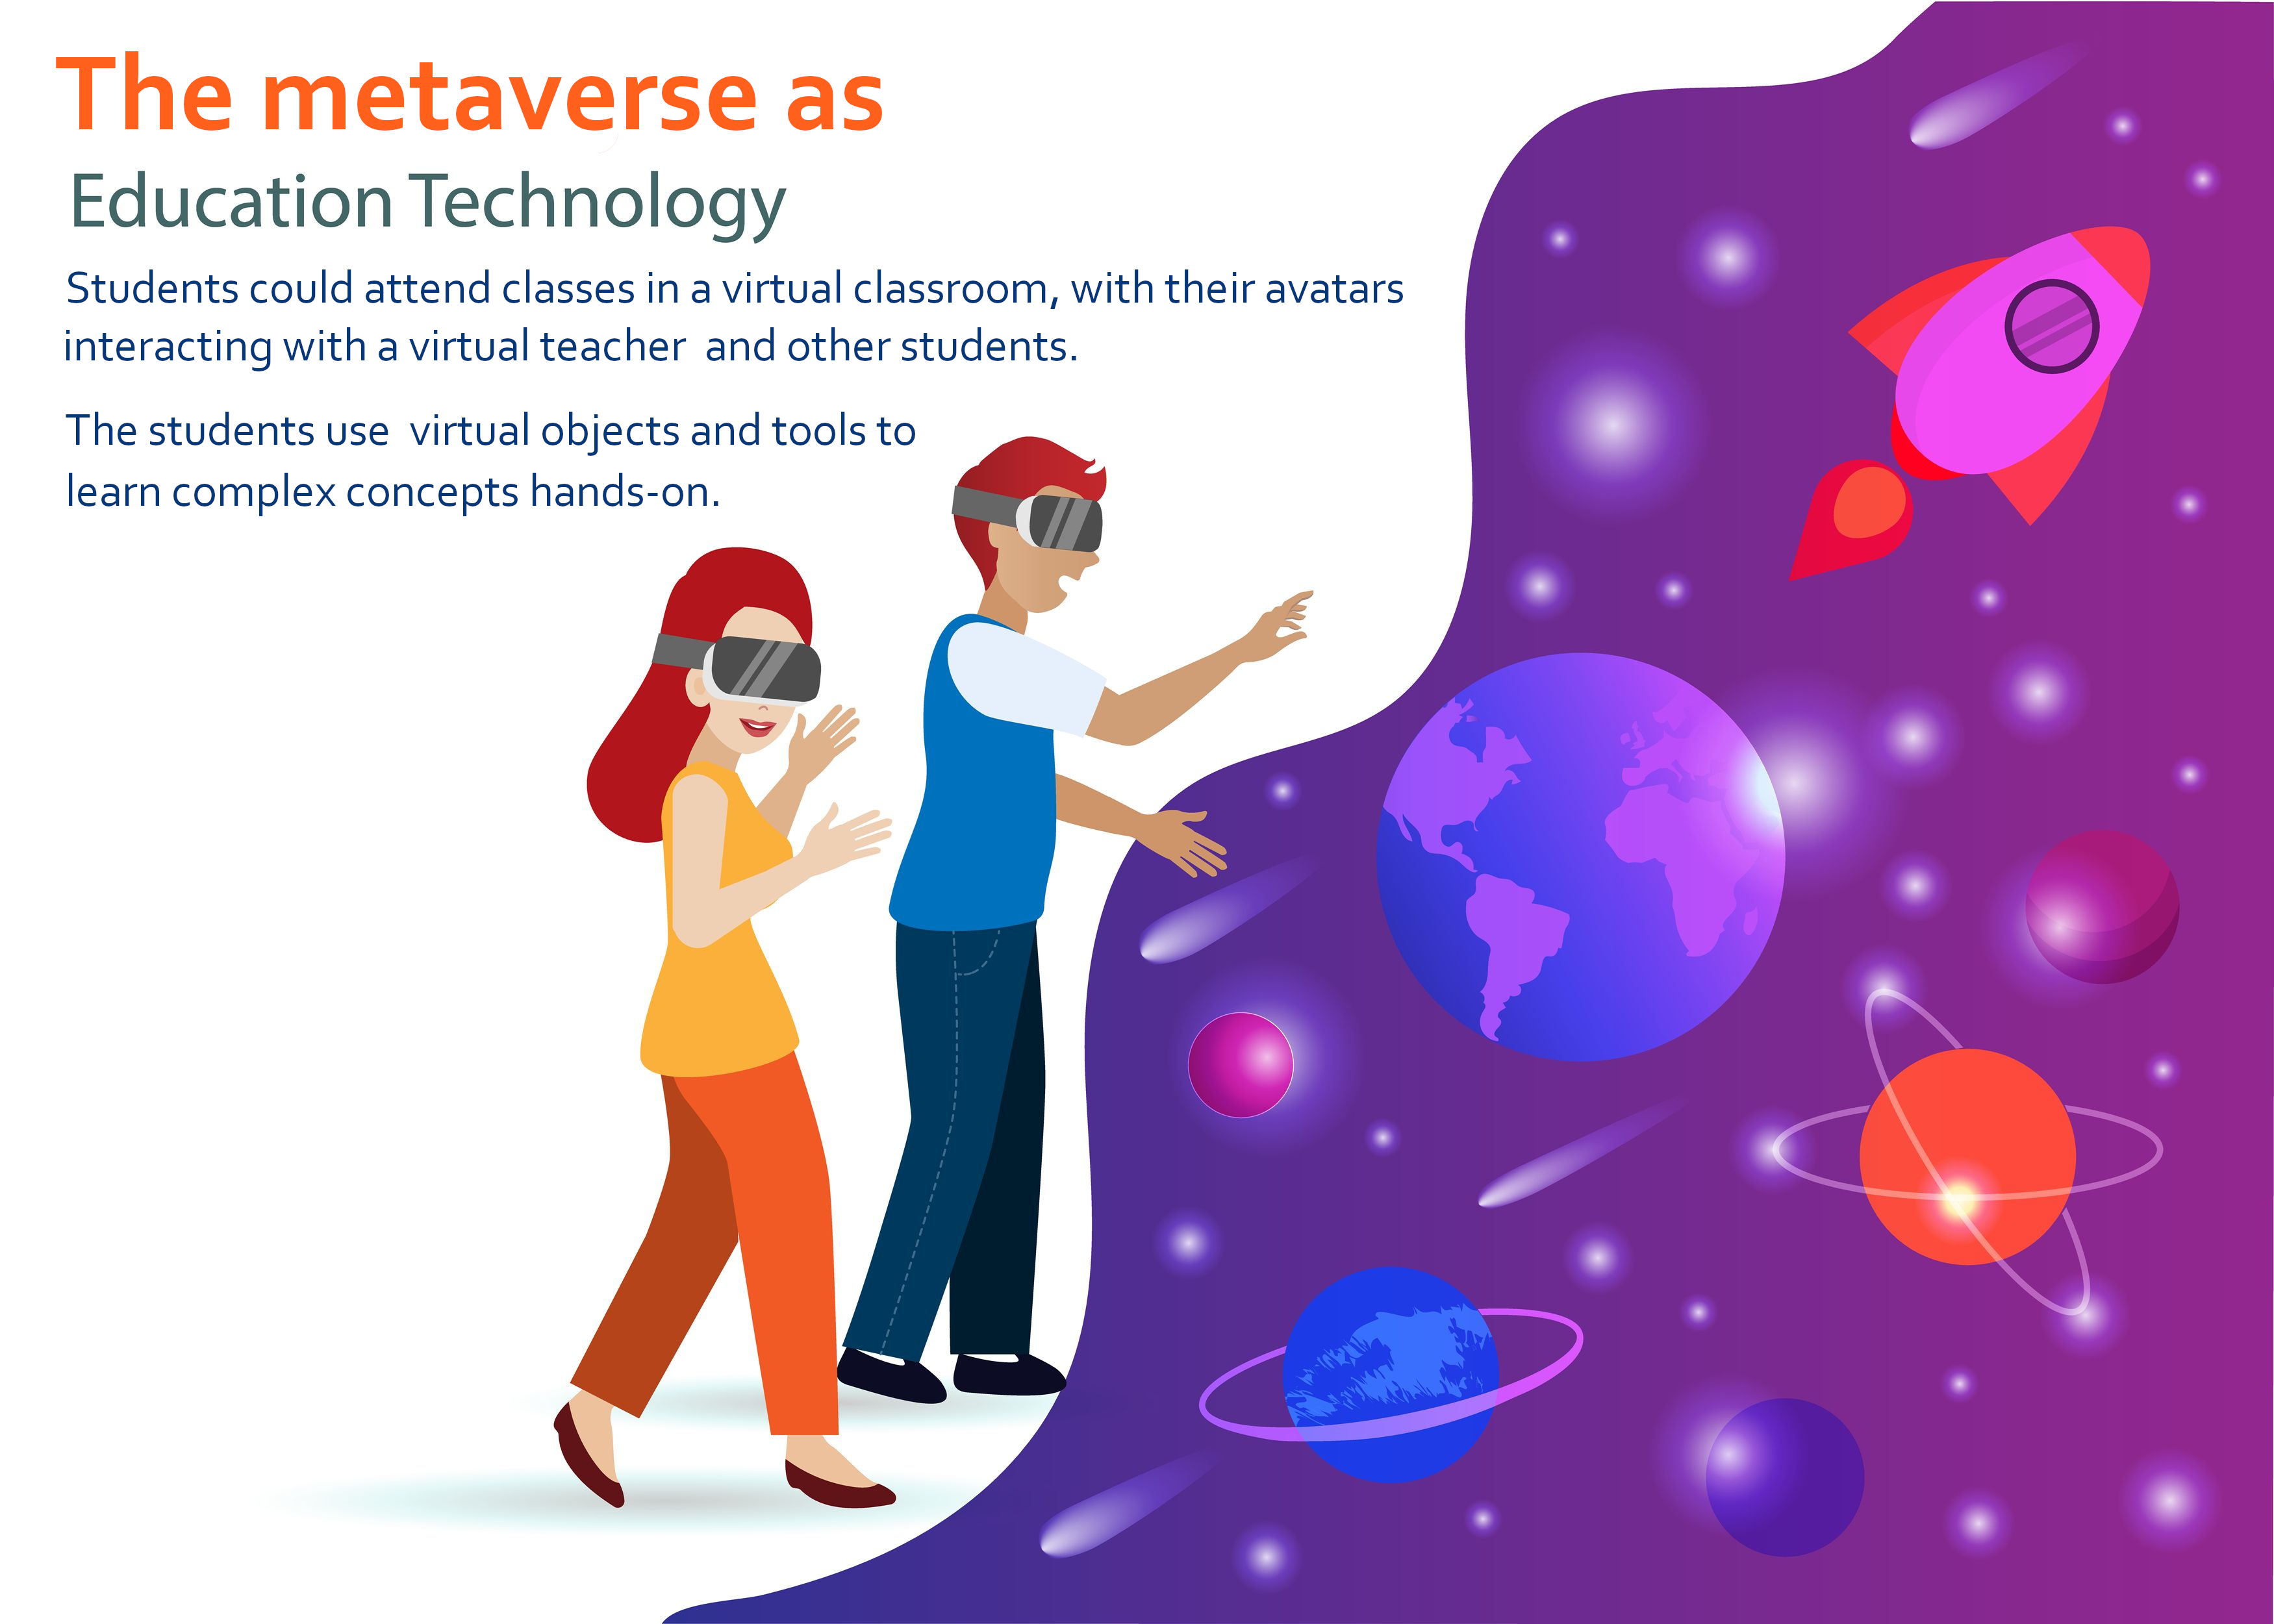 two children wearing VR headsets exploring the universe through the metaverse